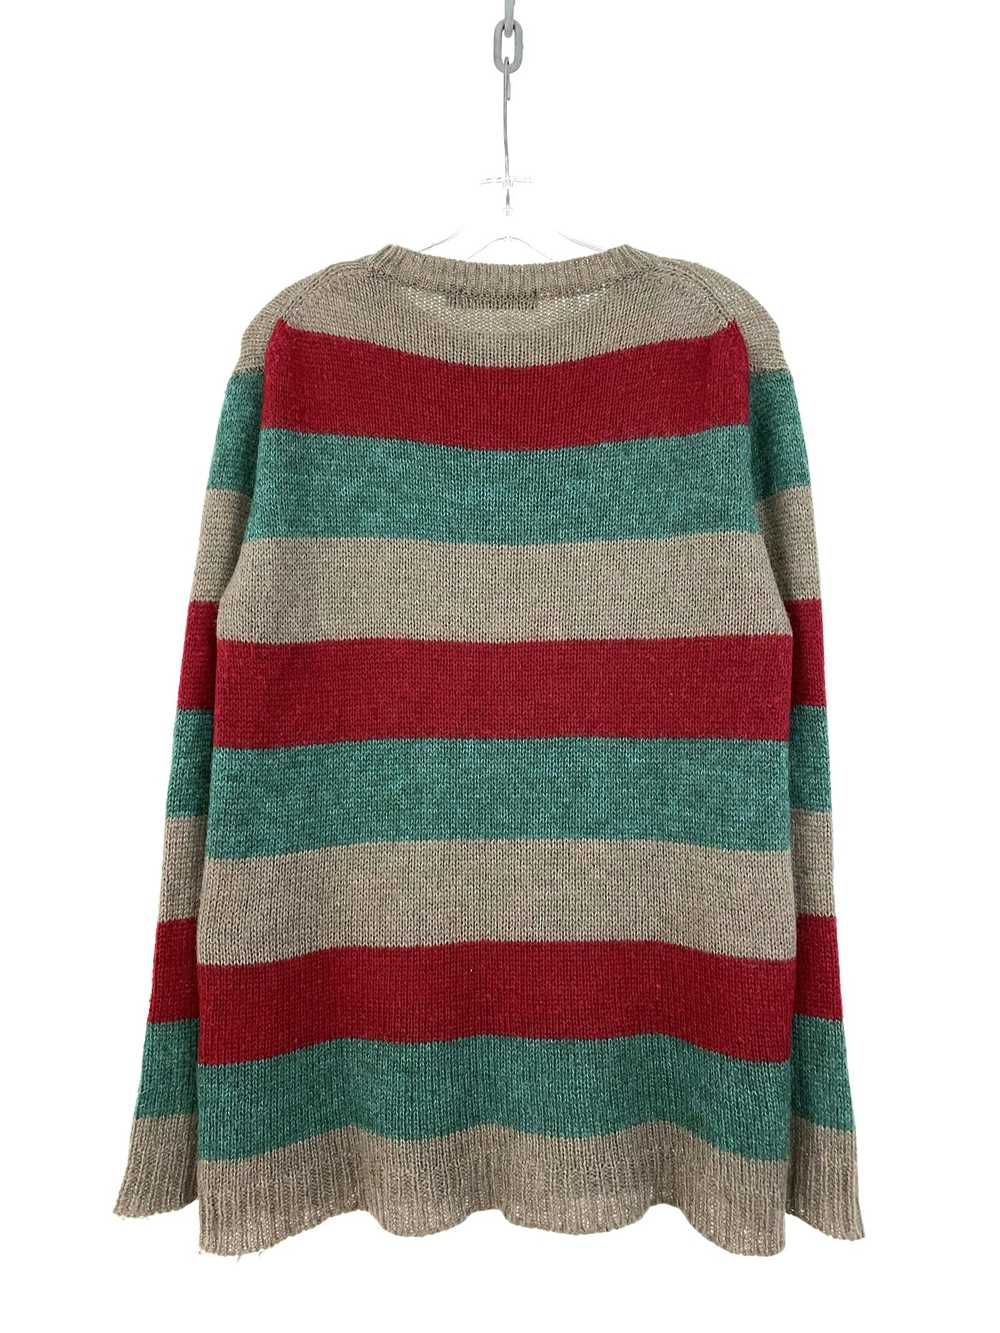 Undercover AW05 Arts & Crafts Mohair Sweater - image 6